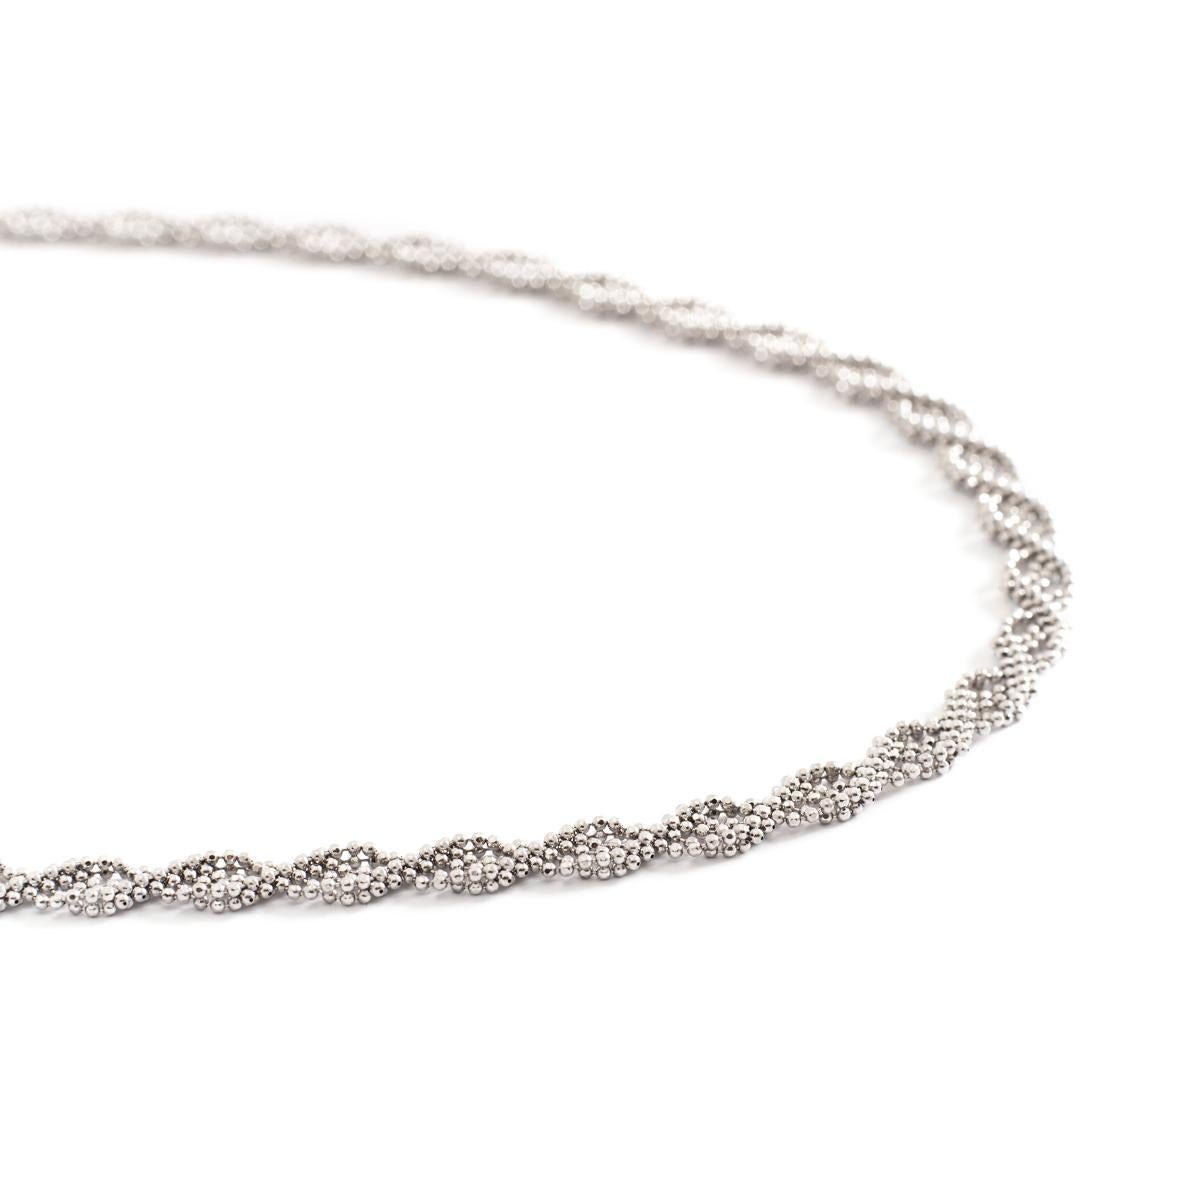 White gold twisted Necklace.
Thickness: 6.50 millimeters.
Total length: approximately 42.00 centimeters.
Gross weight: 18.97 grams.